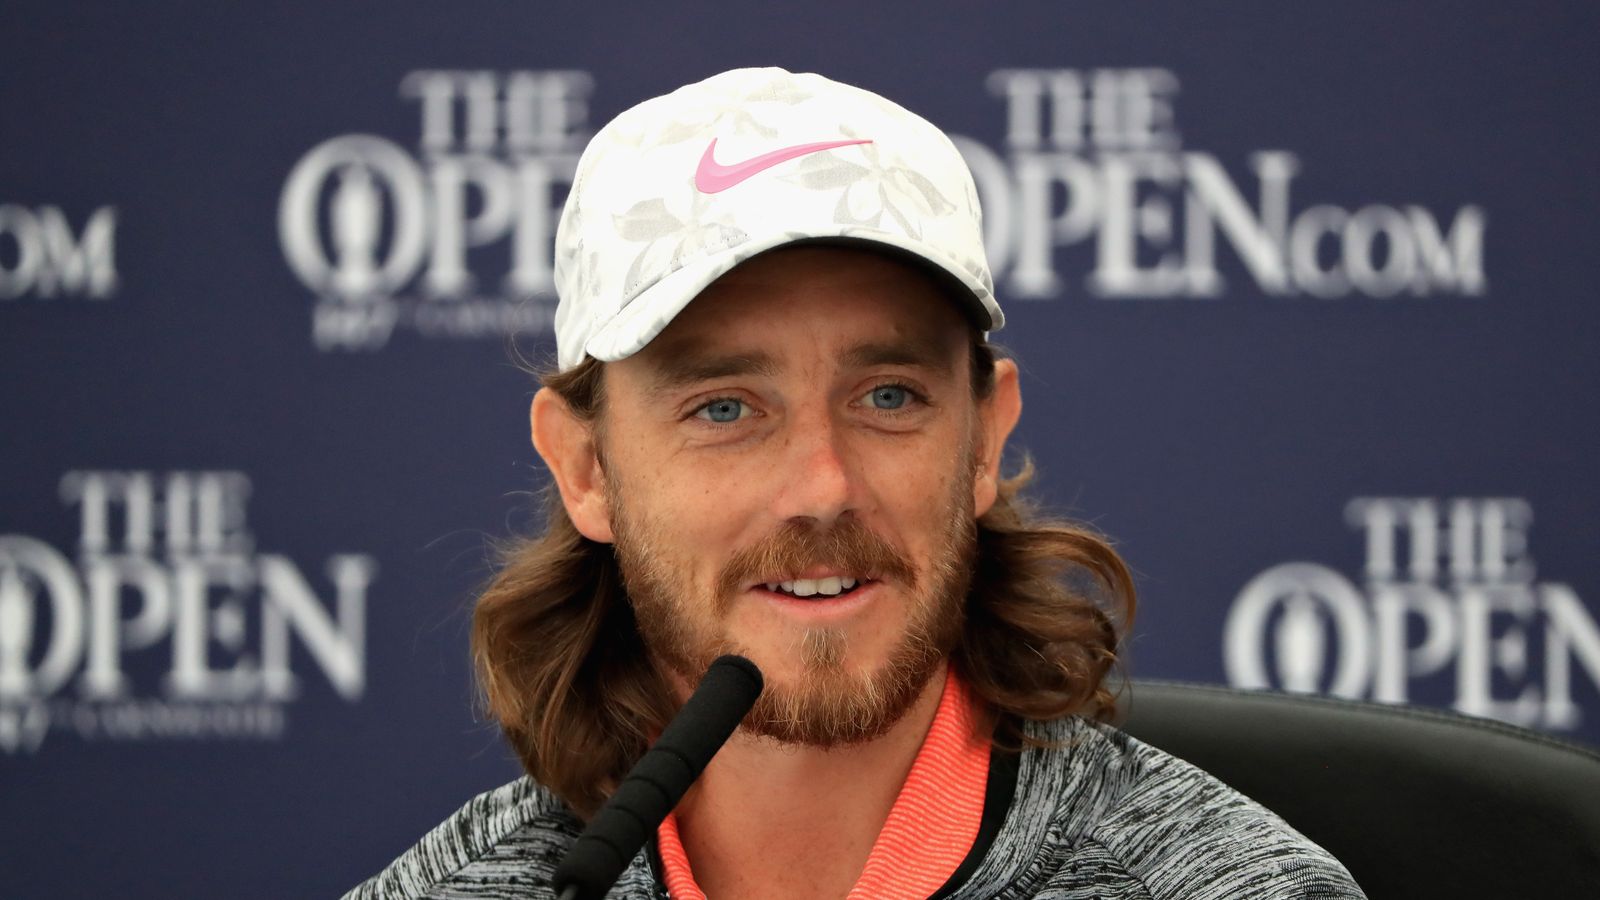 Tommy Fleetwood buoyed by US Open display as he prepares for The Open